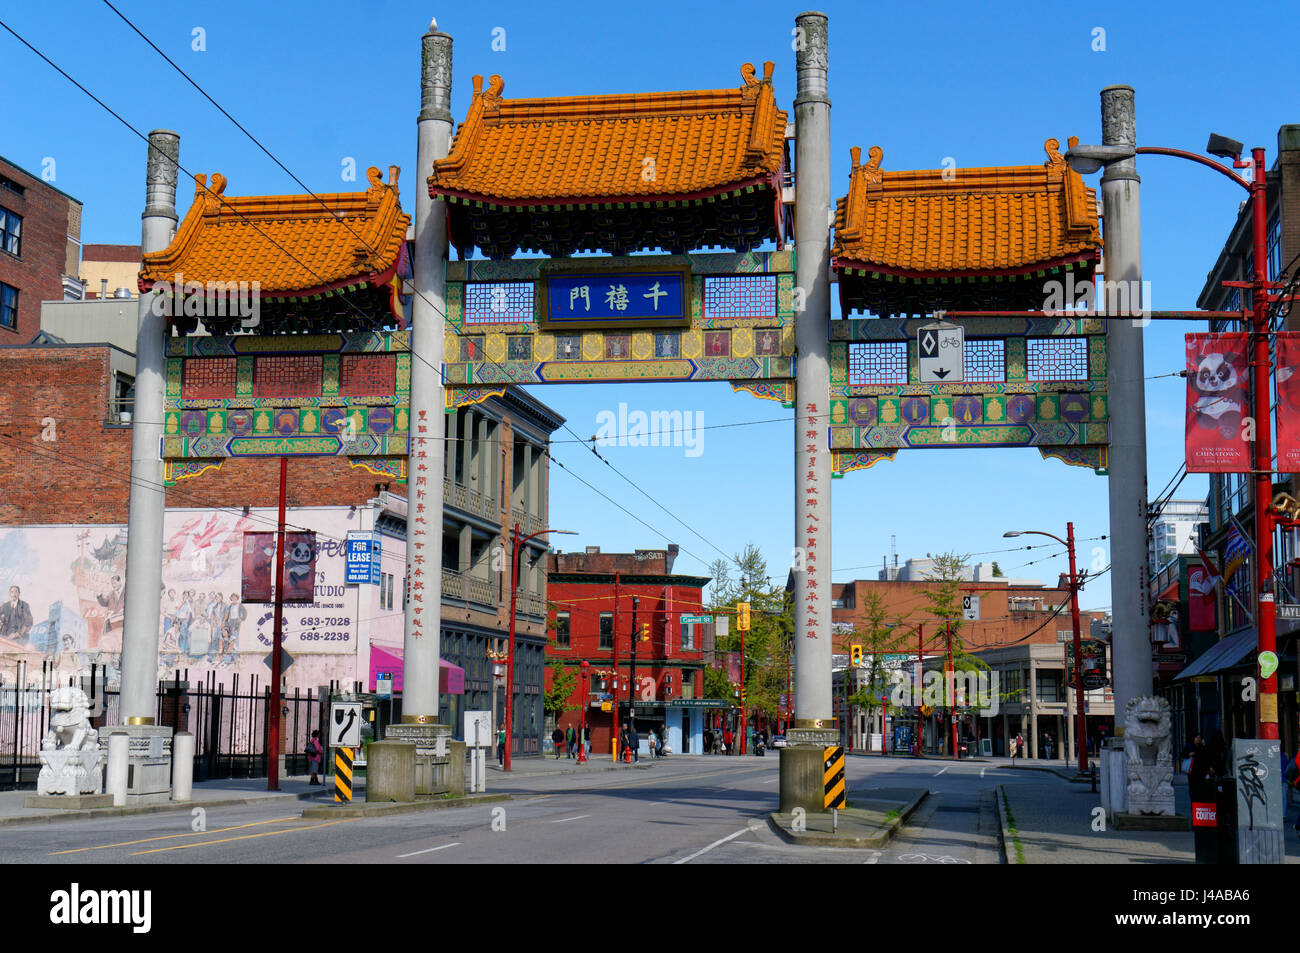 Vancouver Chinatown Millennium Gate at the entrance to Chinatown, Vancouver, British Columbia, Canada Stock Photo